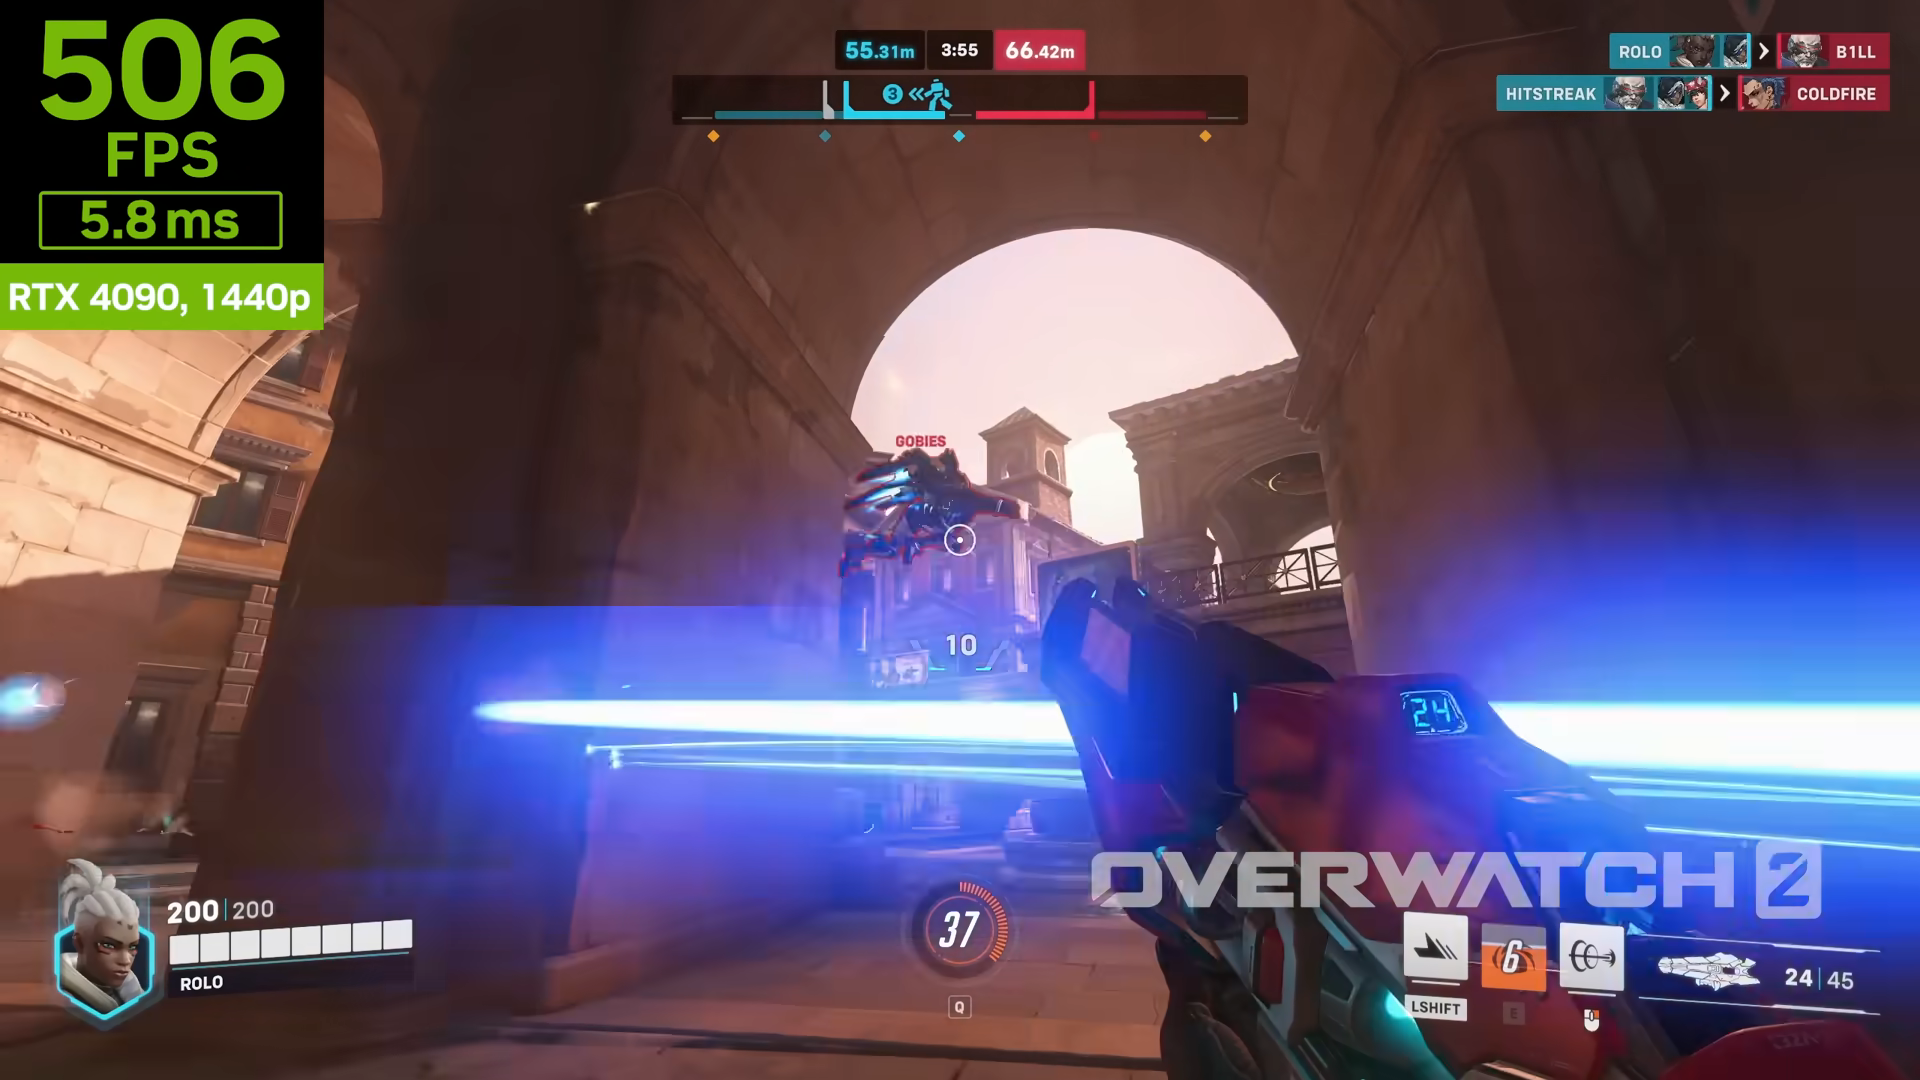 Media asset (photo, screenshot, or image in full size) related to contents posted at 3dfxzone.it | Image Name: news33694_Overwatch-2_GeForce-RTX-4090_Screenshot_1.png